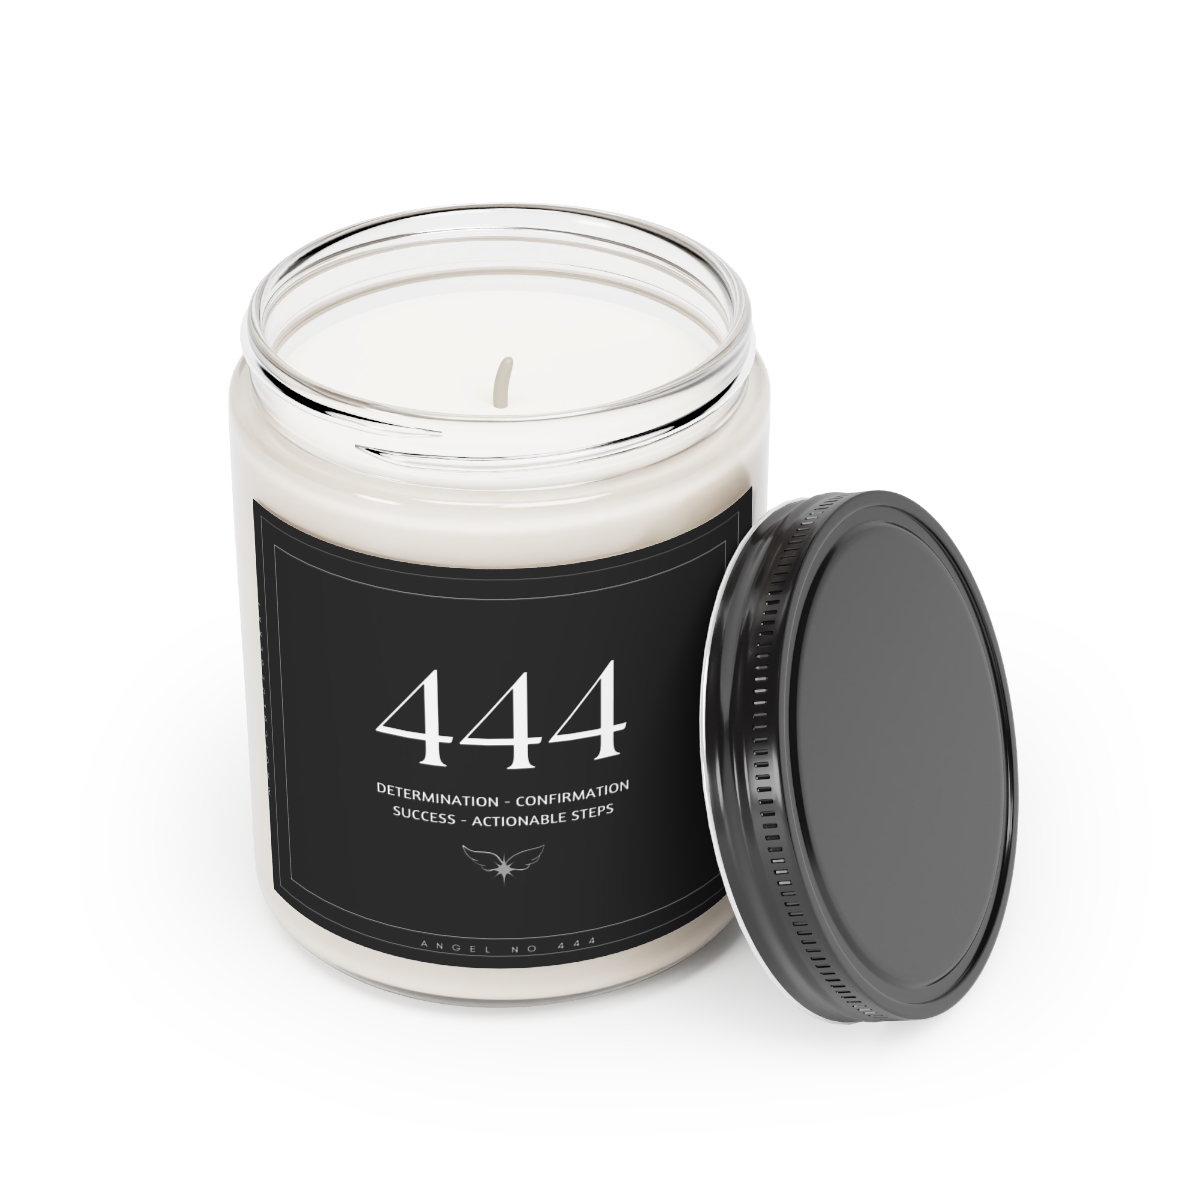 Angel Spell 444 - Scented Vegan Soy Wax Candles, Clear Jar Candle, Spell Candles, Sassy Candle, Vegan Candle, Cotton Wick Candle product thumbnail image